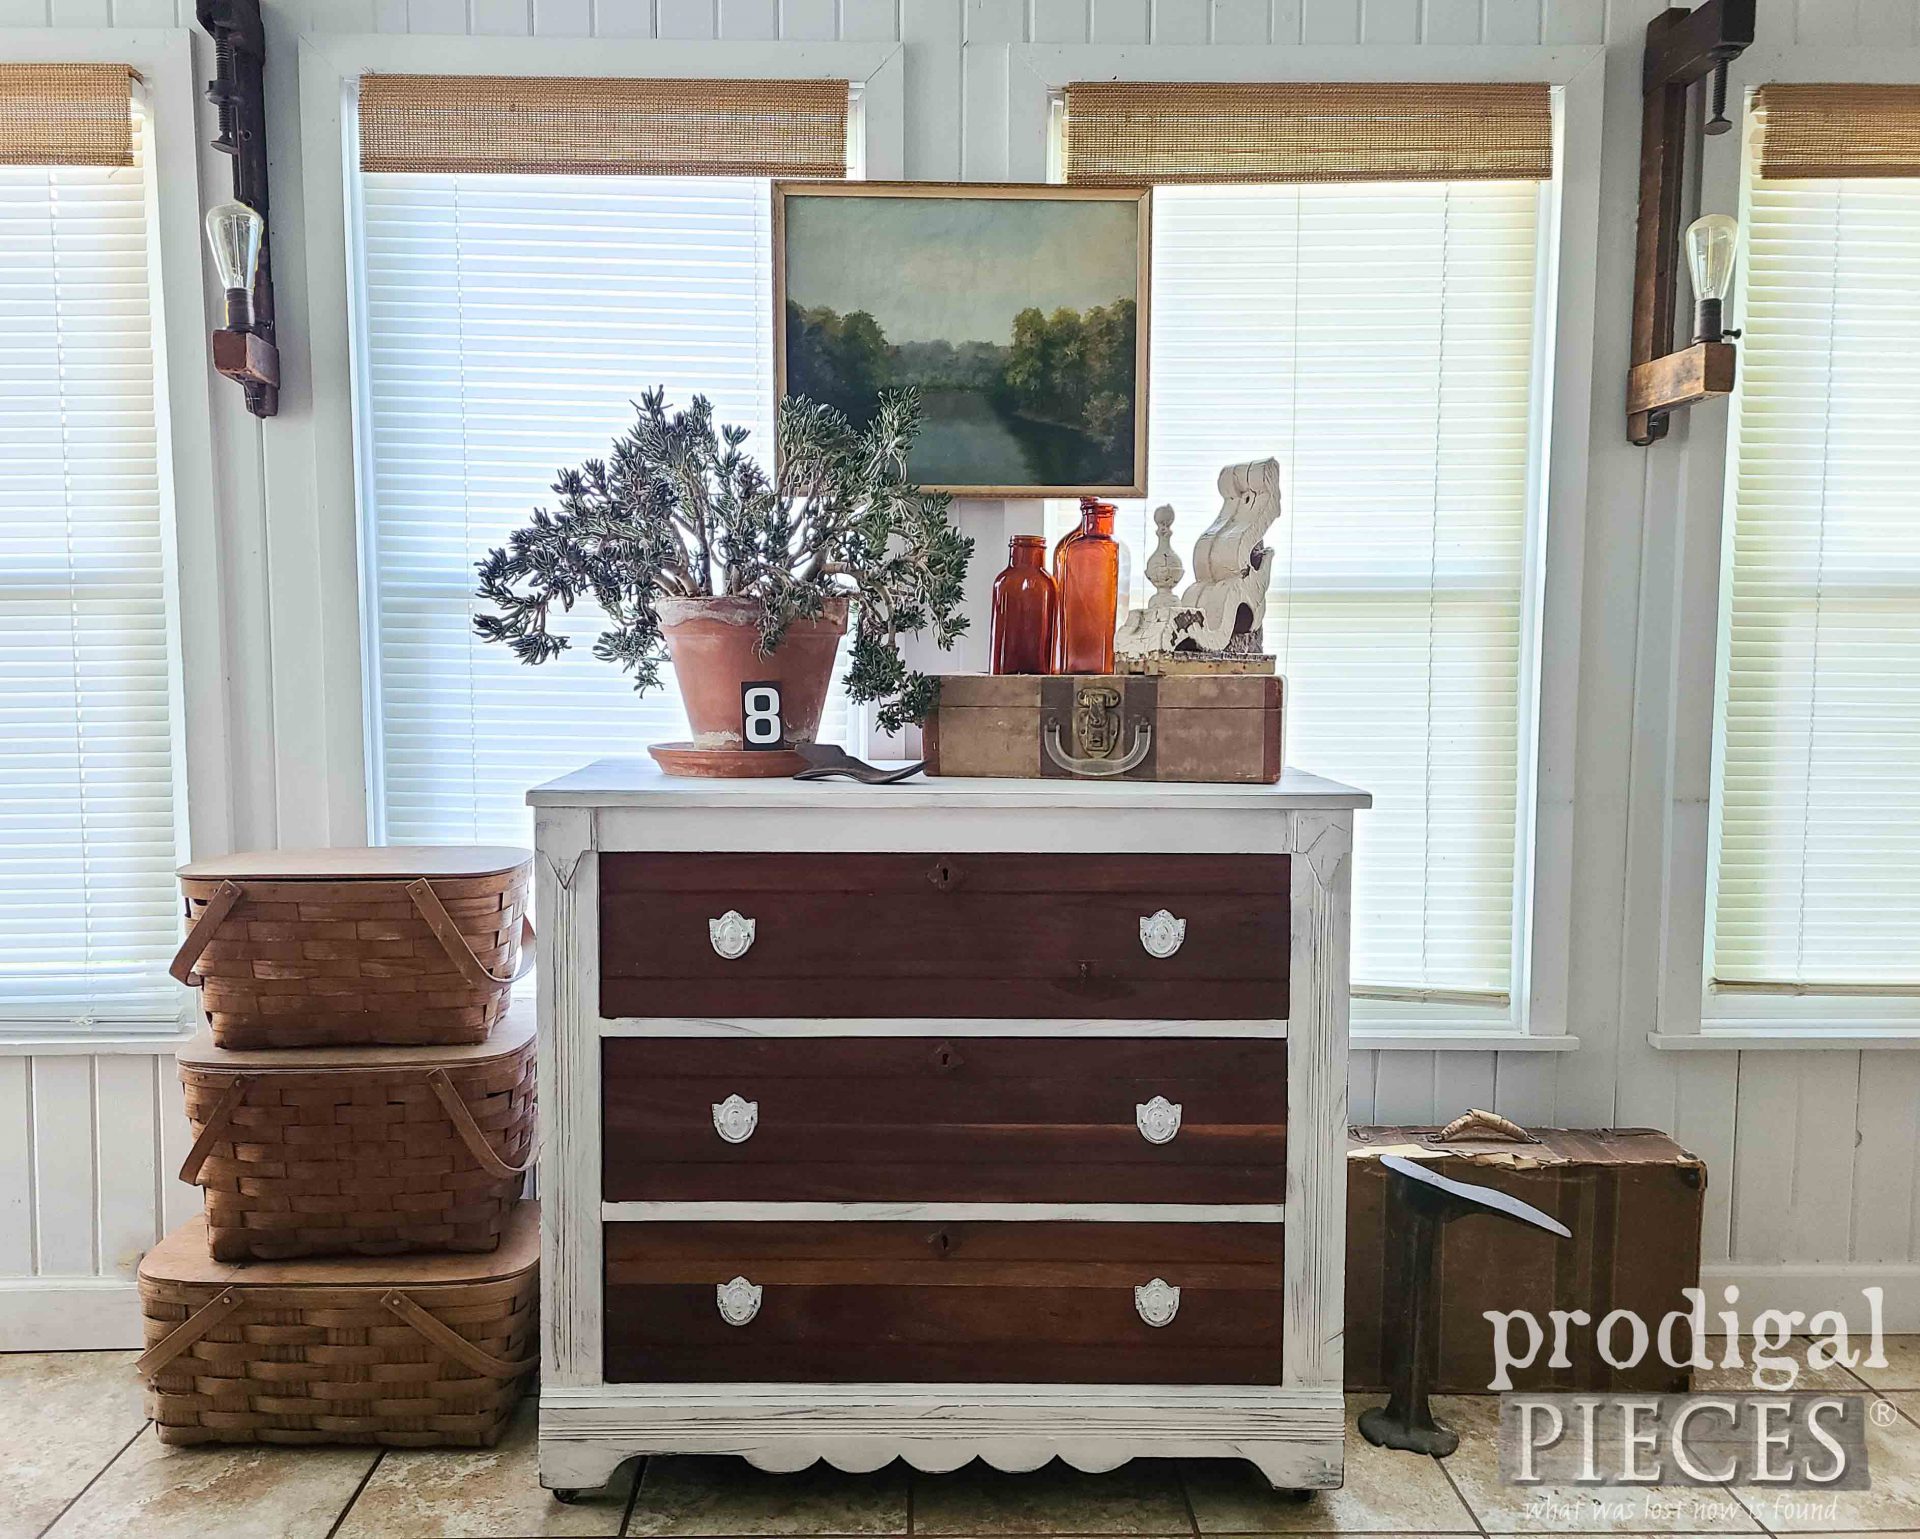 Farmhouse Furniture Vignette Featuring a Damaged Chest of Drawers Restored by Larissa of Prodigal Pieces | prodigalpieces.com #prodigalpieces #farmhouse #furntiure #antique